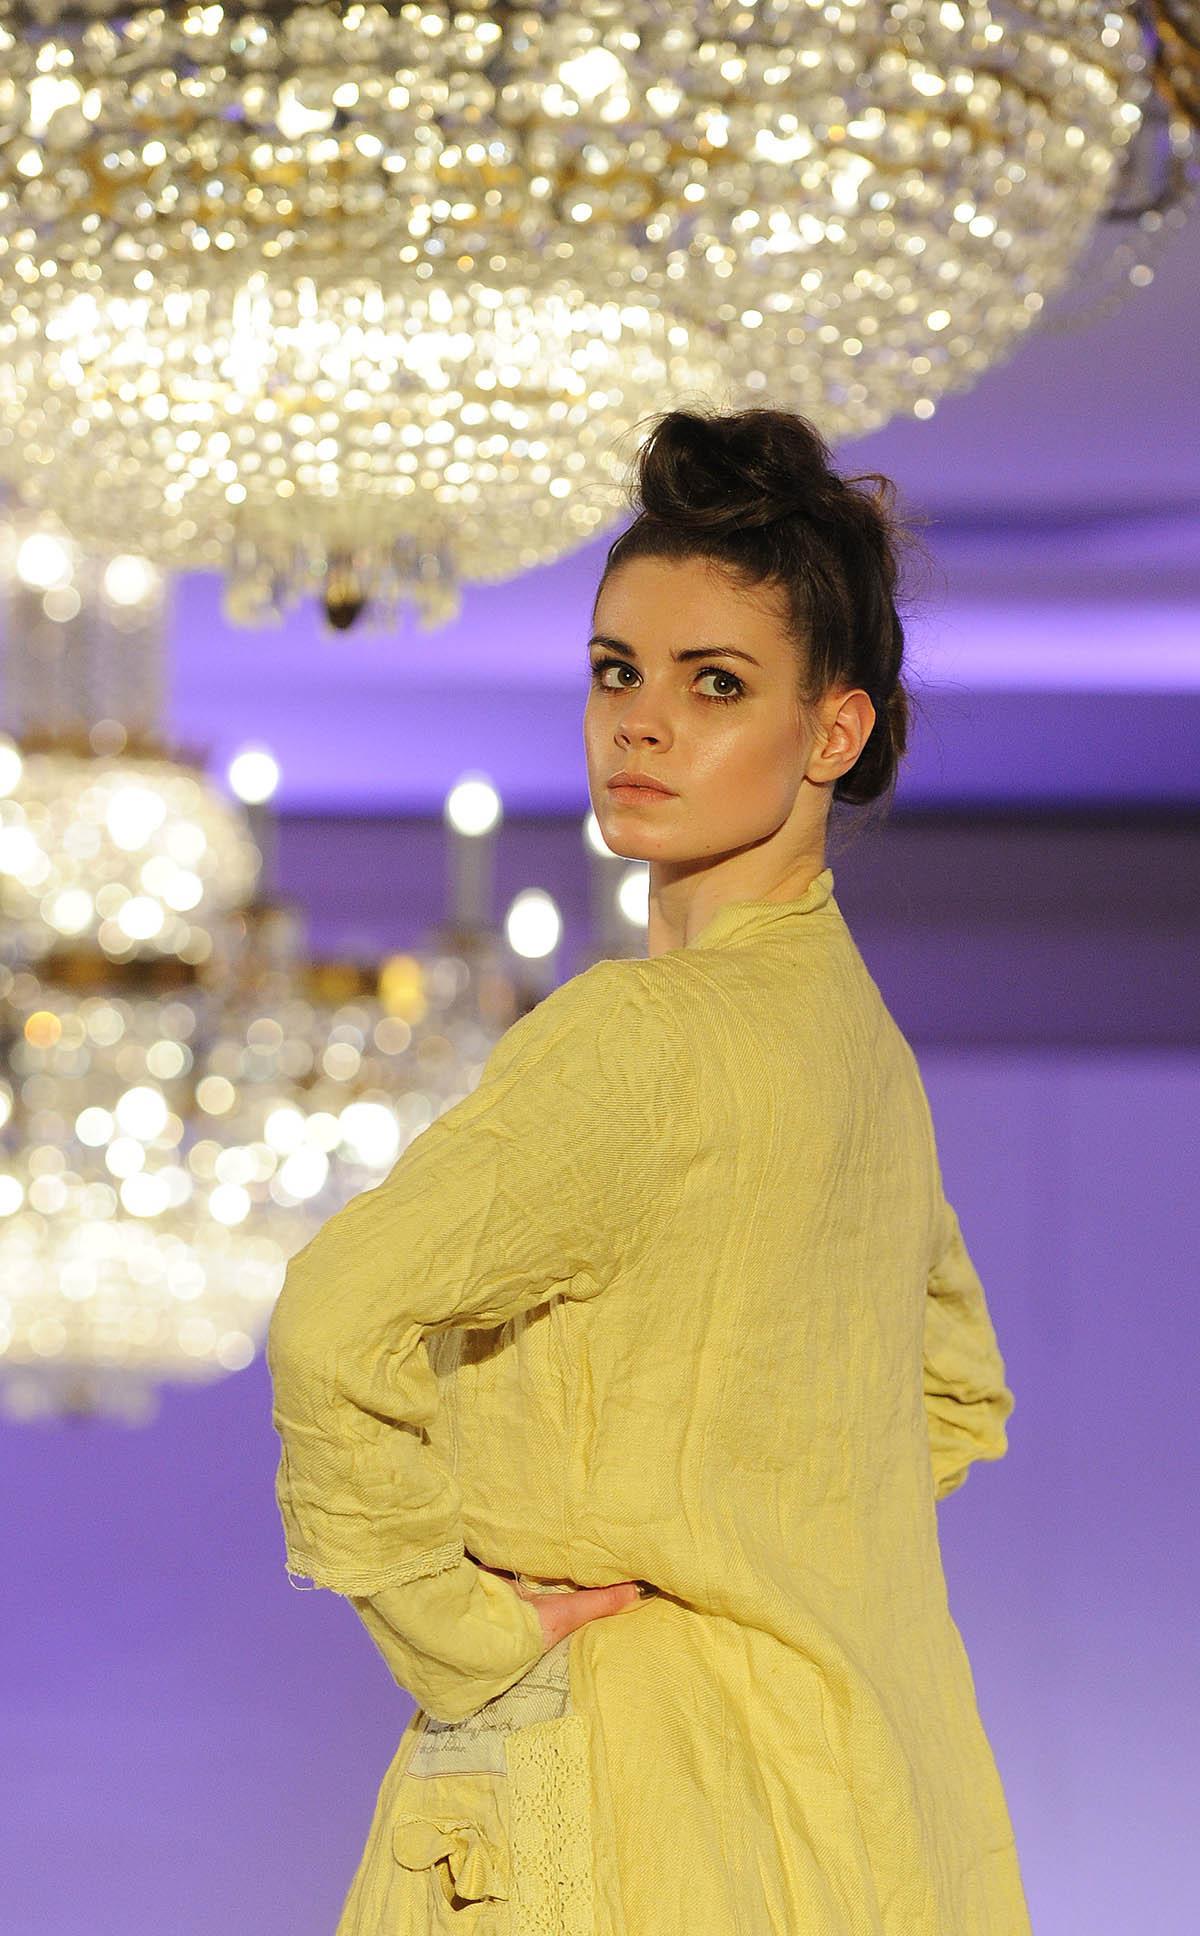 Pictures from Oxford Fashion Week's opening runway event, the Cosmopolitan Show in the Randolph Hotel Ballroom.
